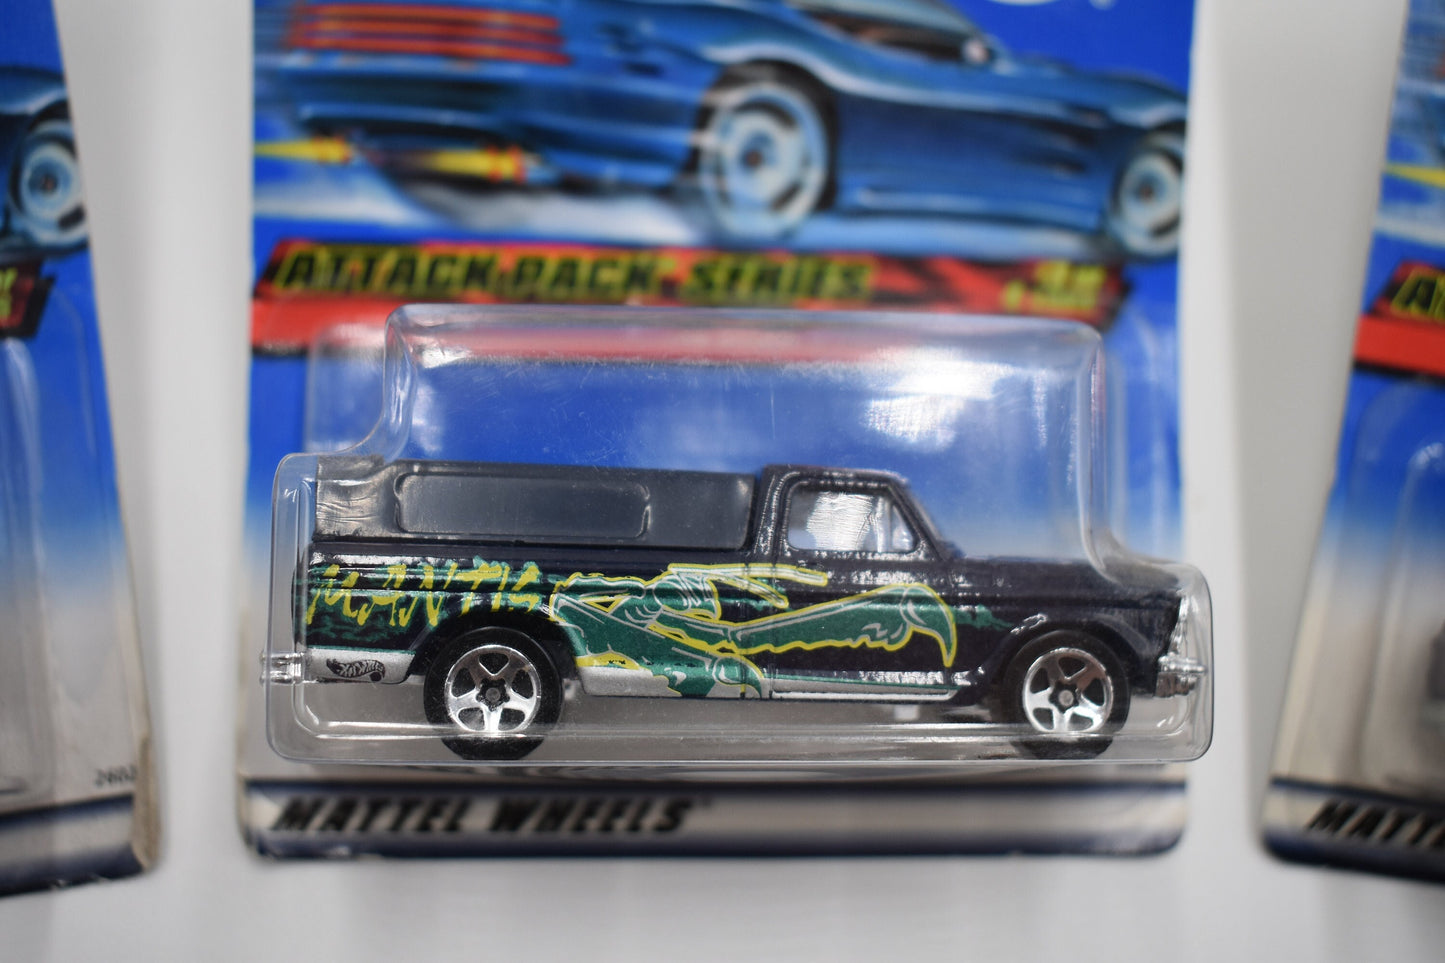 Hot Wheels '79 Ford F-150 Attack Pack Vintage Collectable Scale Model Miniature Toy Car Perfect Birthday Gift